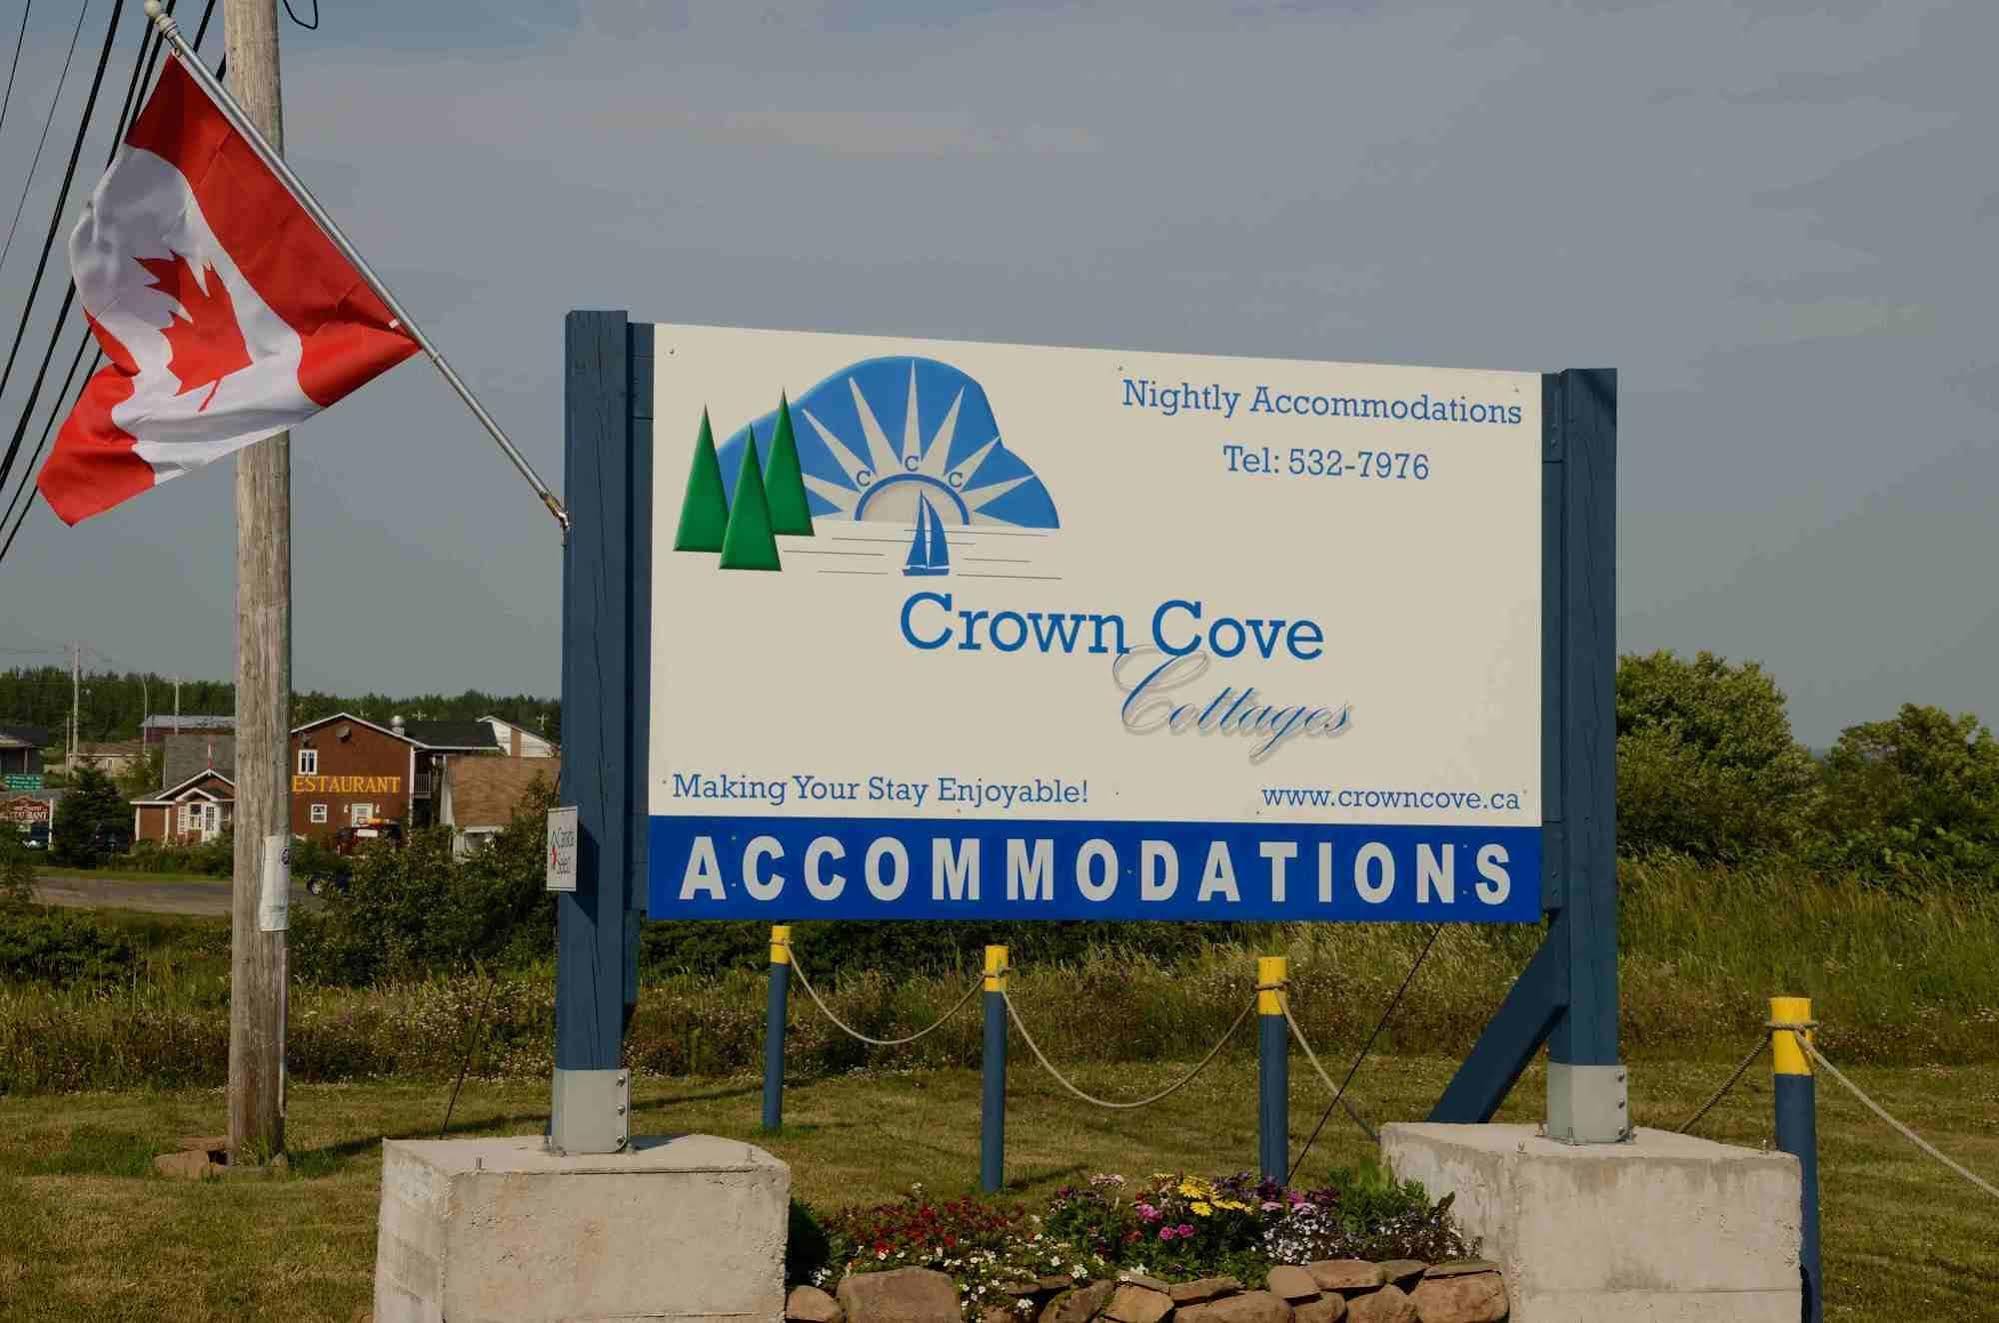 Crown Cove Cottages